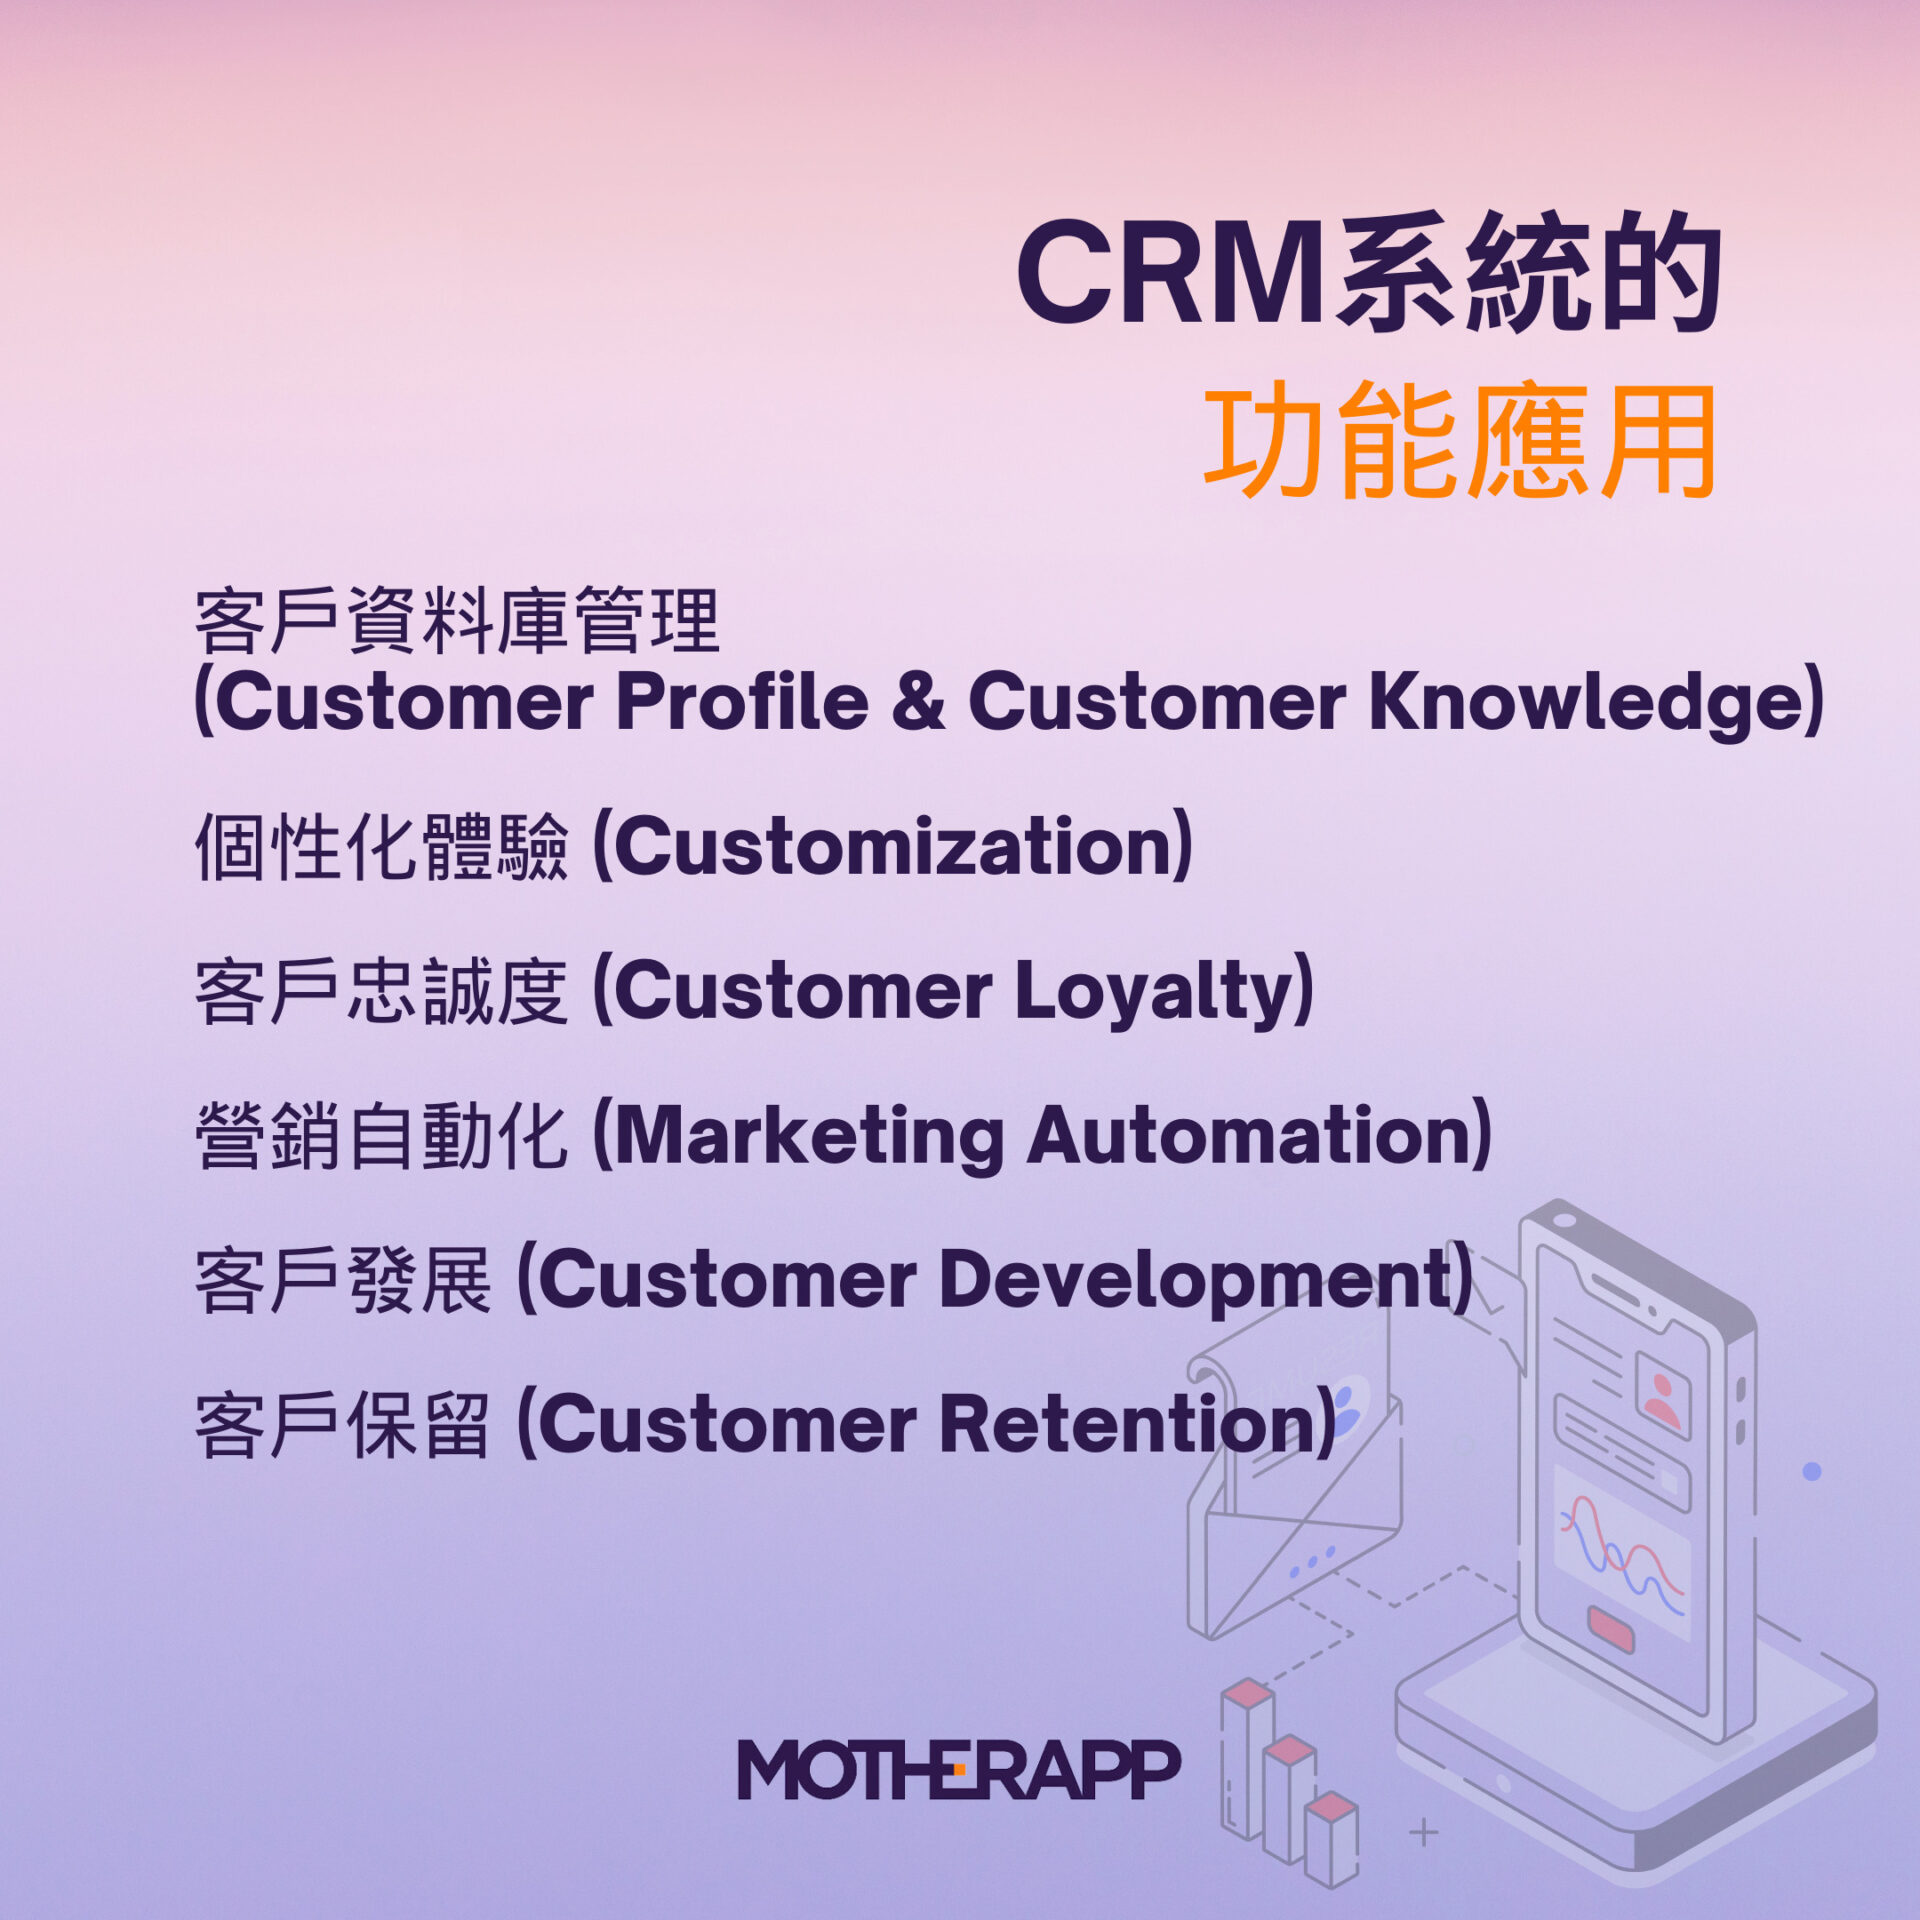 crm function